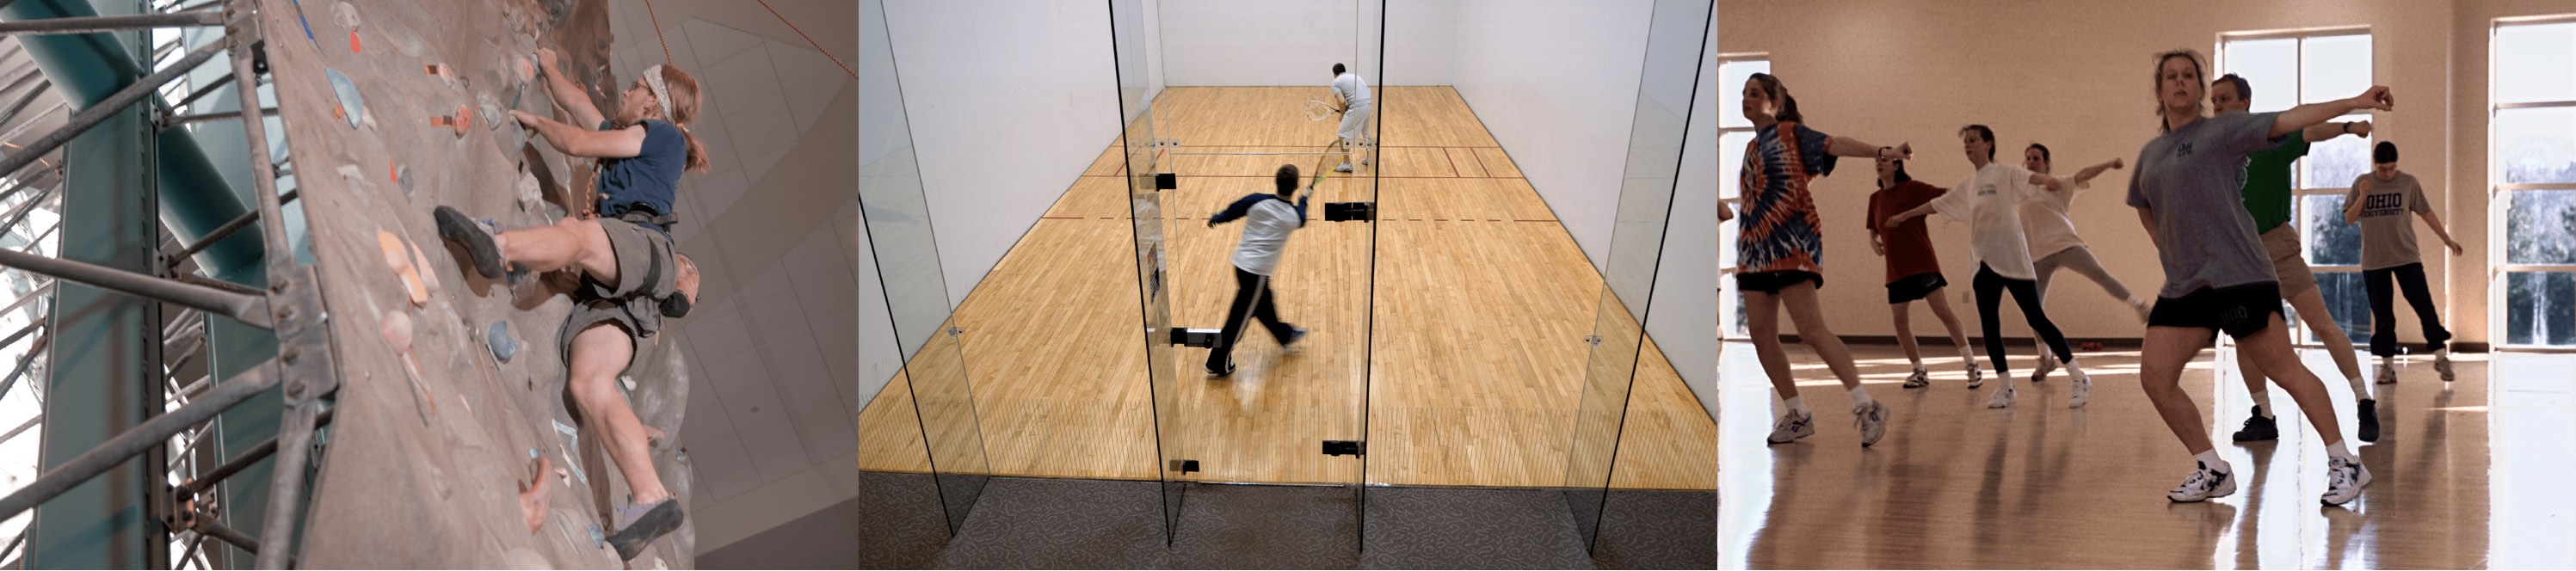 Three images left to right: A woman using the rock climbing wall at Ping, two people playing tennis, A group dance cardio class